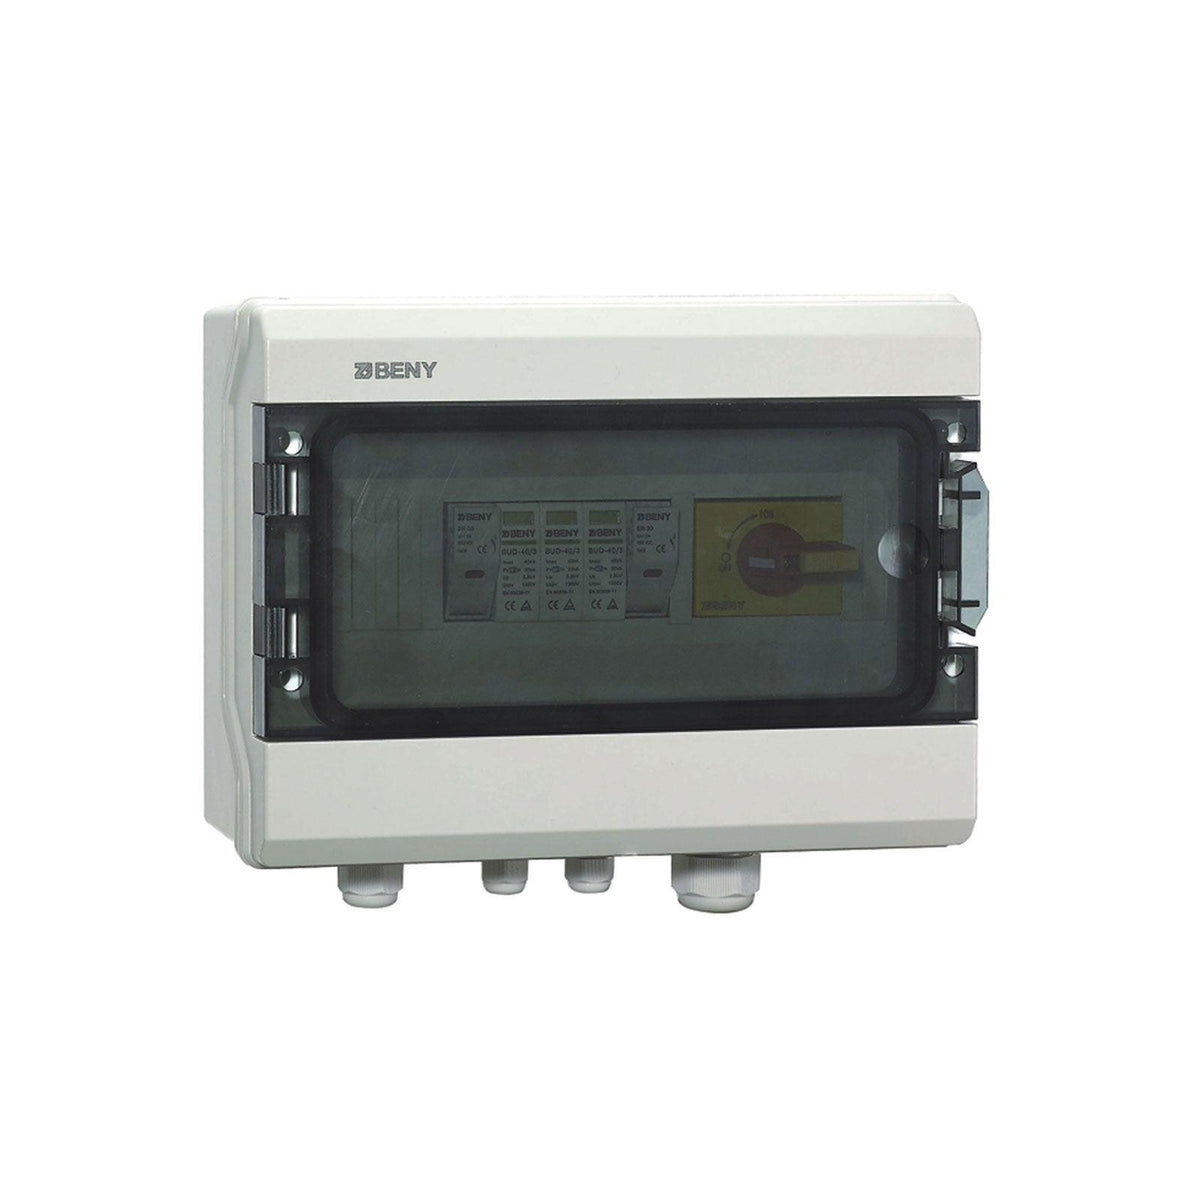 PV Combiner DC Switch Box 3-way Input 1-way Output - VoltaconSolar